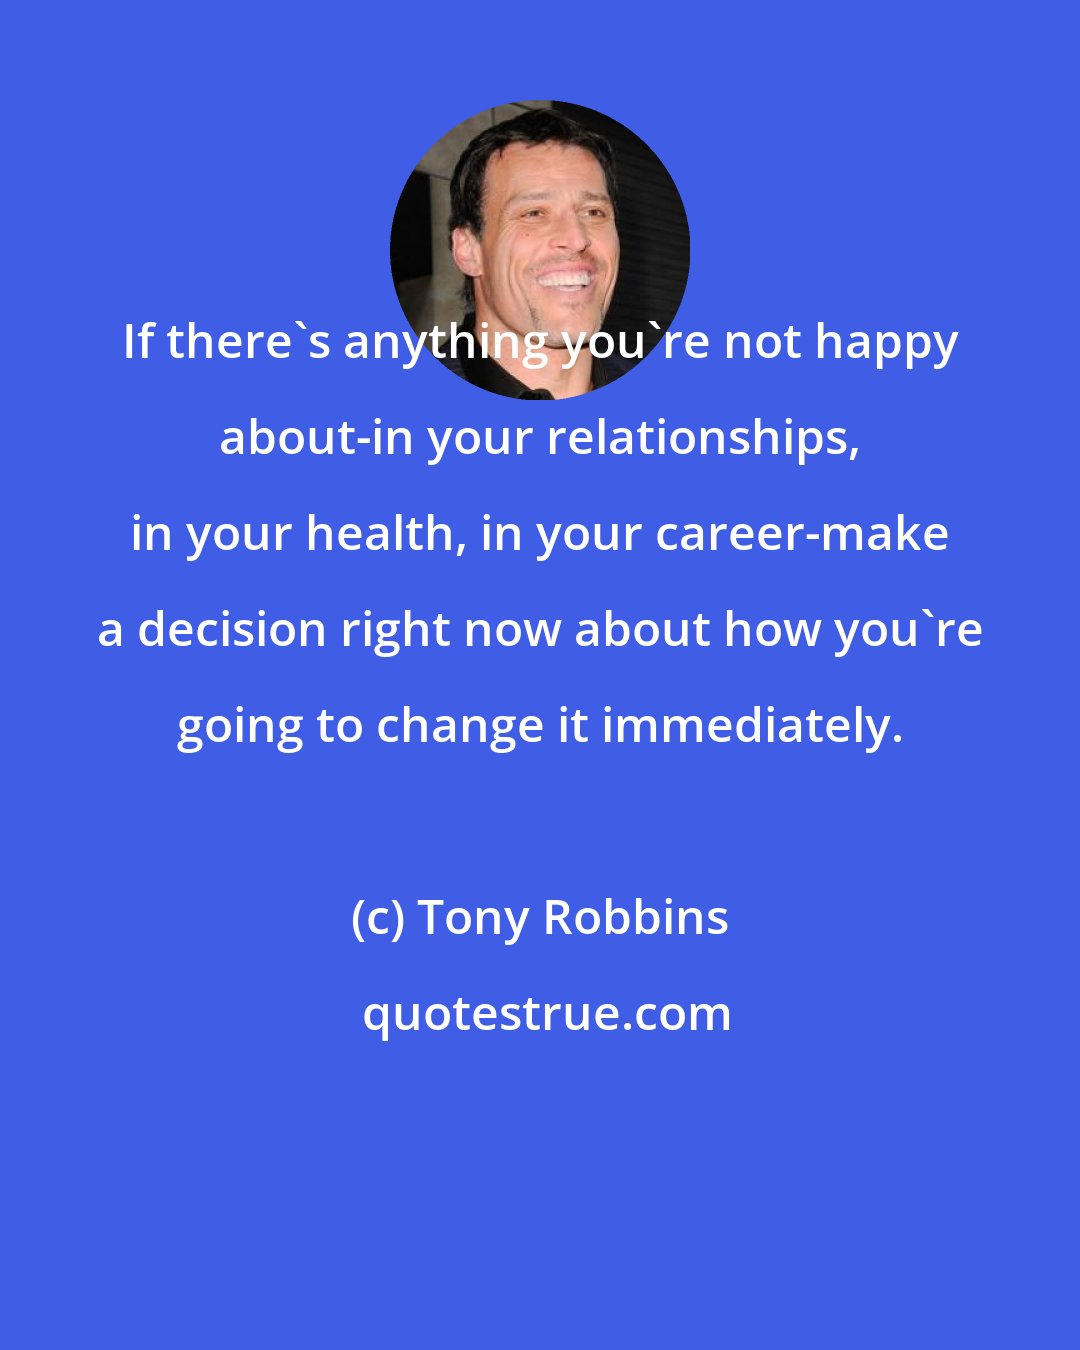 Tony Robbins: If there's anything you're not happy about-in your relationships, in your health, in your career-make a decision right now about how you're going to change it immediately.